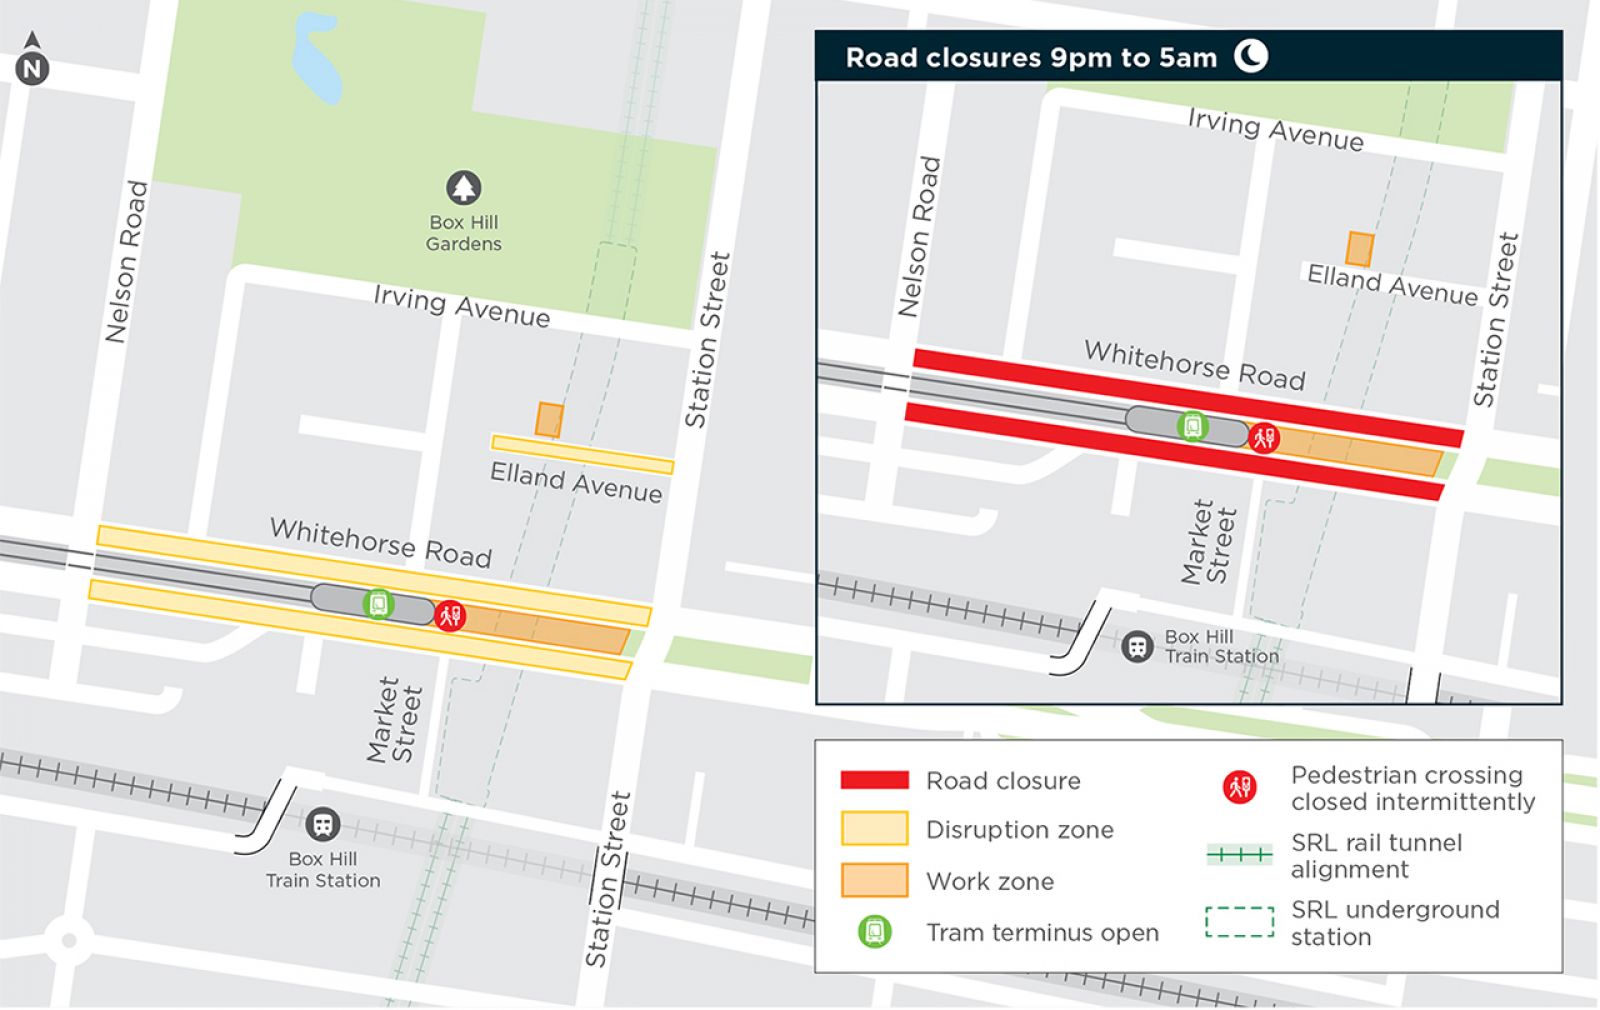 Daytime disruption zone in Whitehorse Road between Nelson Street and Station Street and further disruptions in Elland Avenue.  Whitehorse Road is closed between Nelson Street and Station Street between 9pm and 5am.